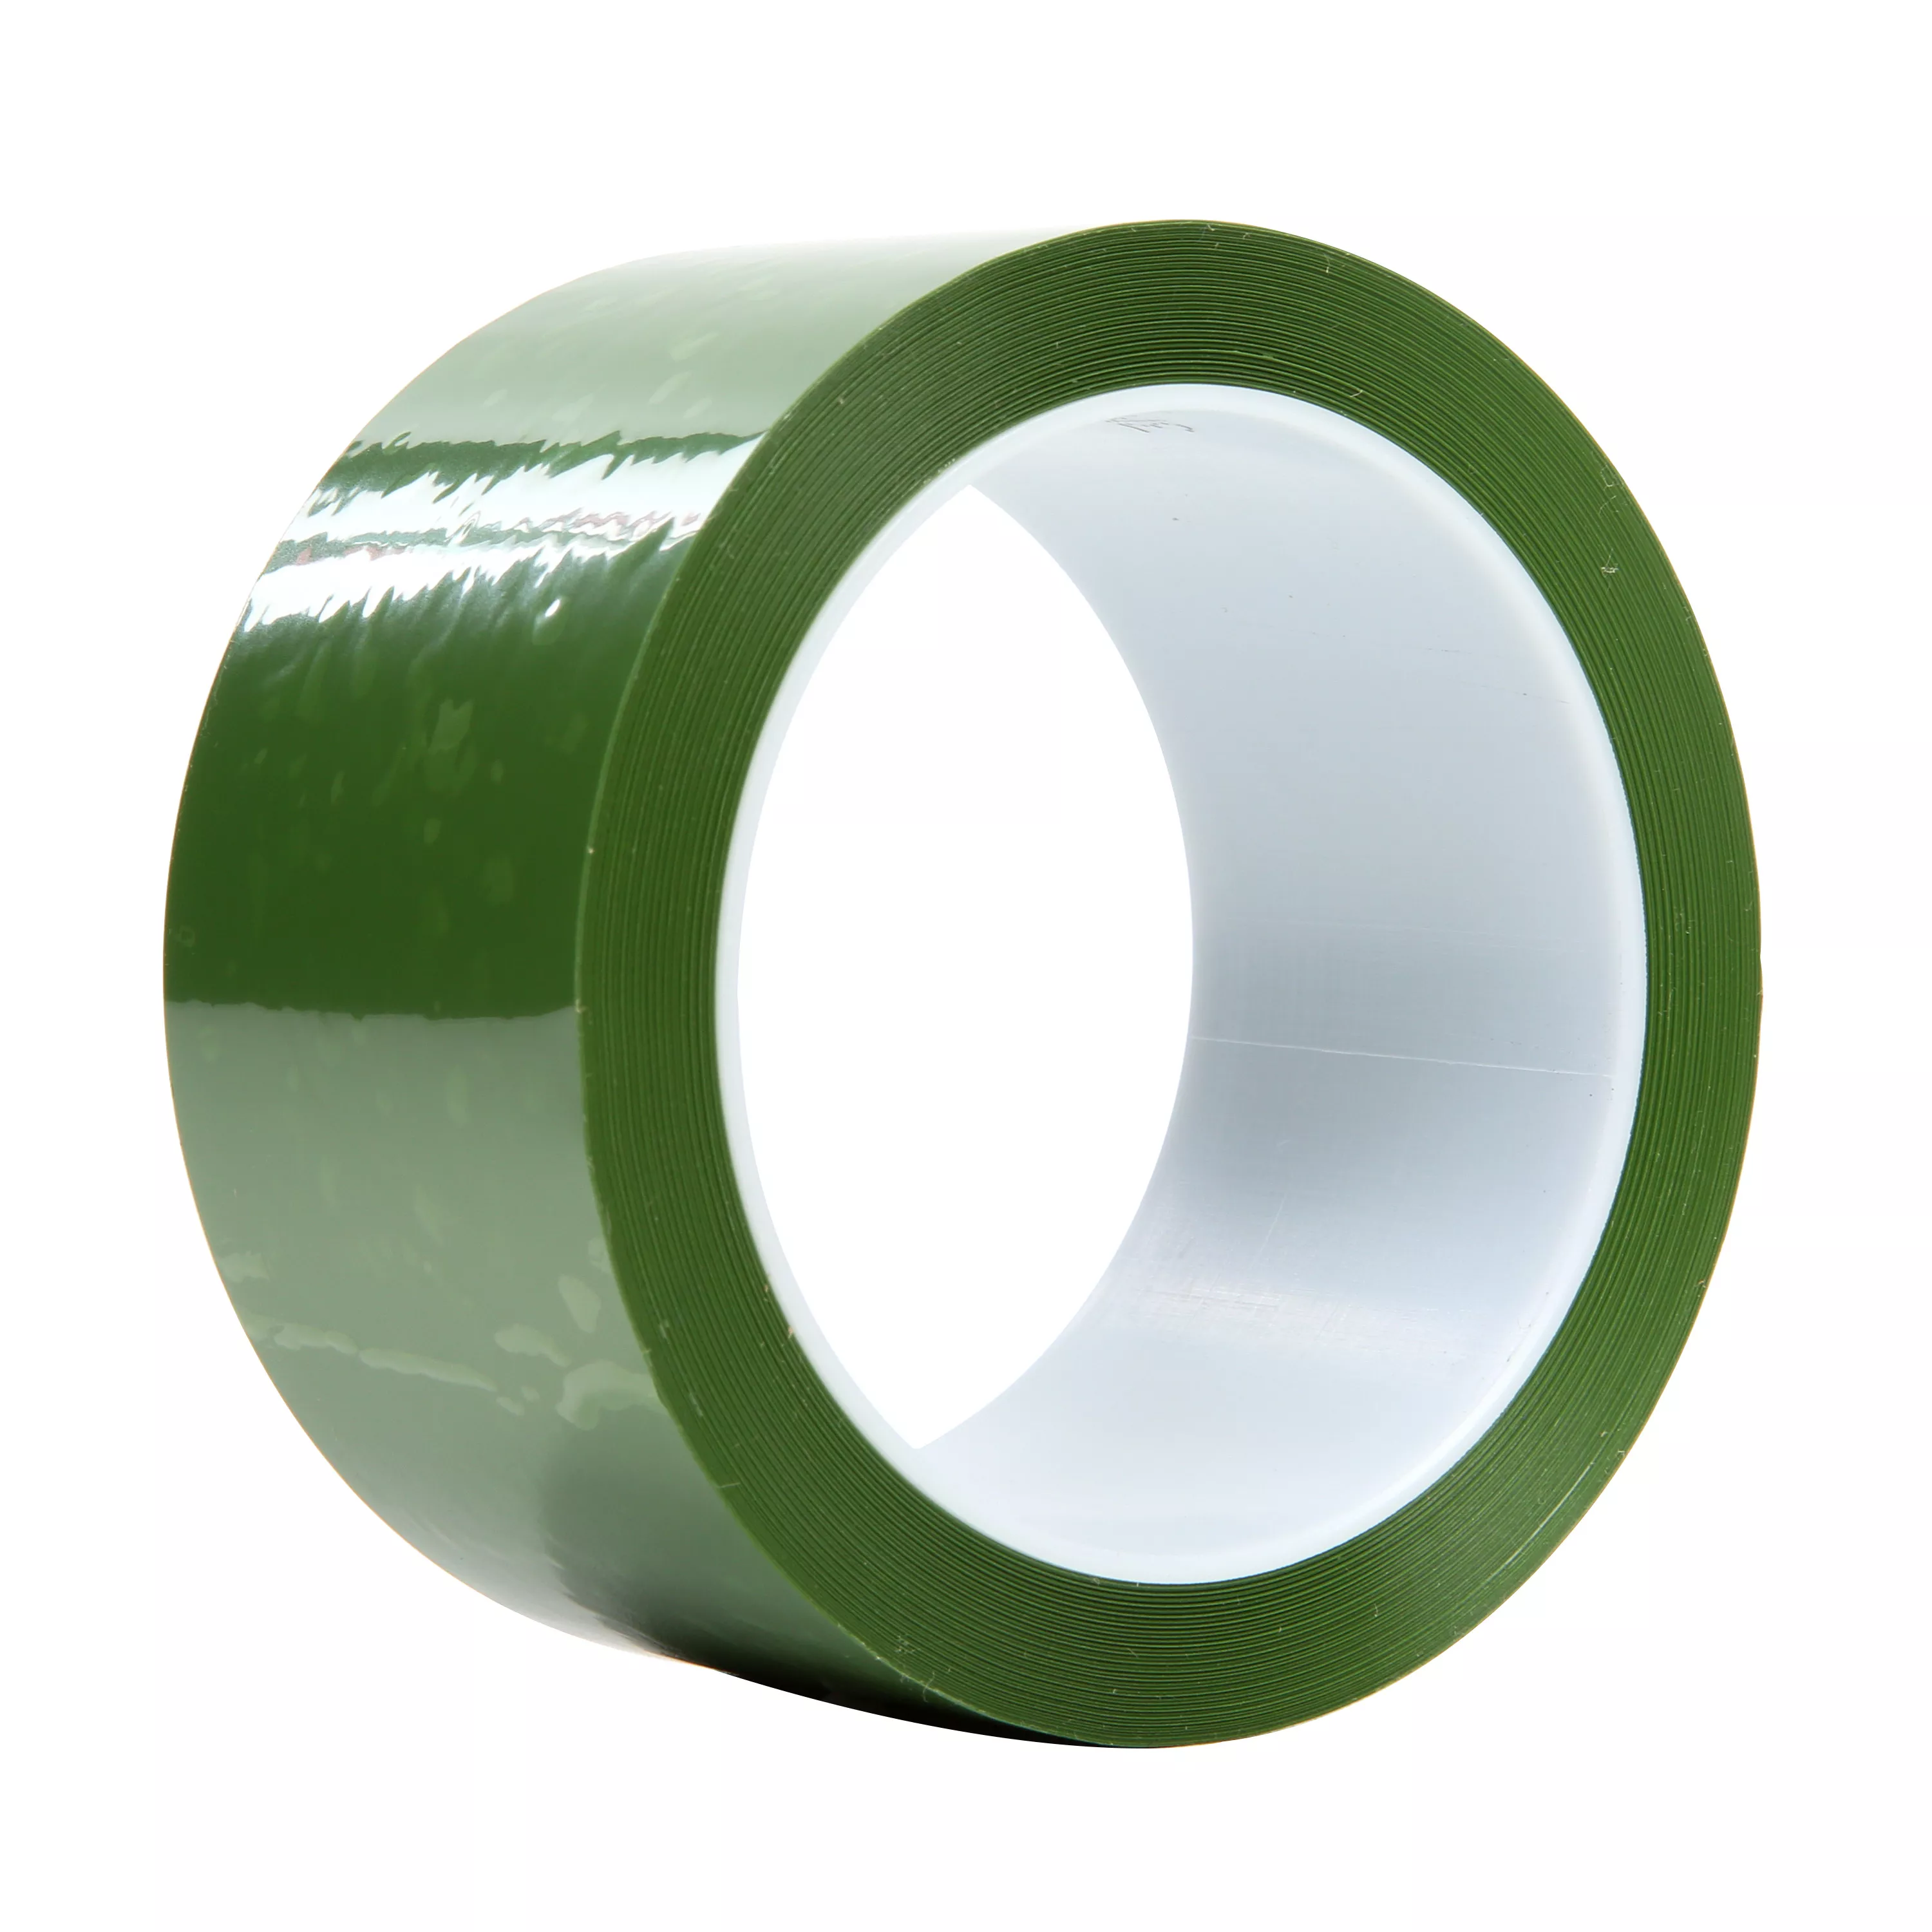 3M™ Polyester Tape 8402, Green, 1.9 mil, 2 in x 72 yd, 24 Roll/Case